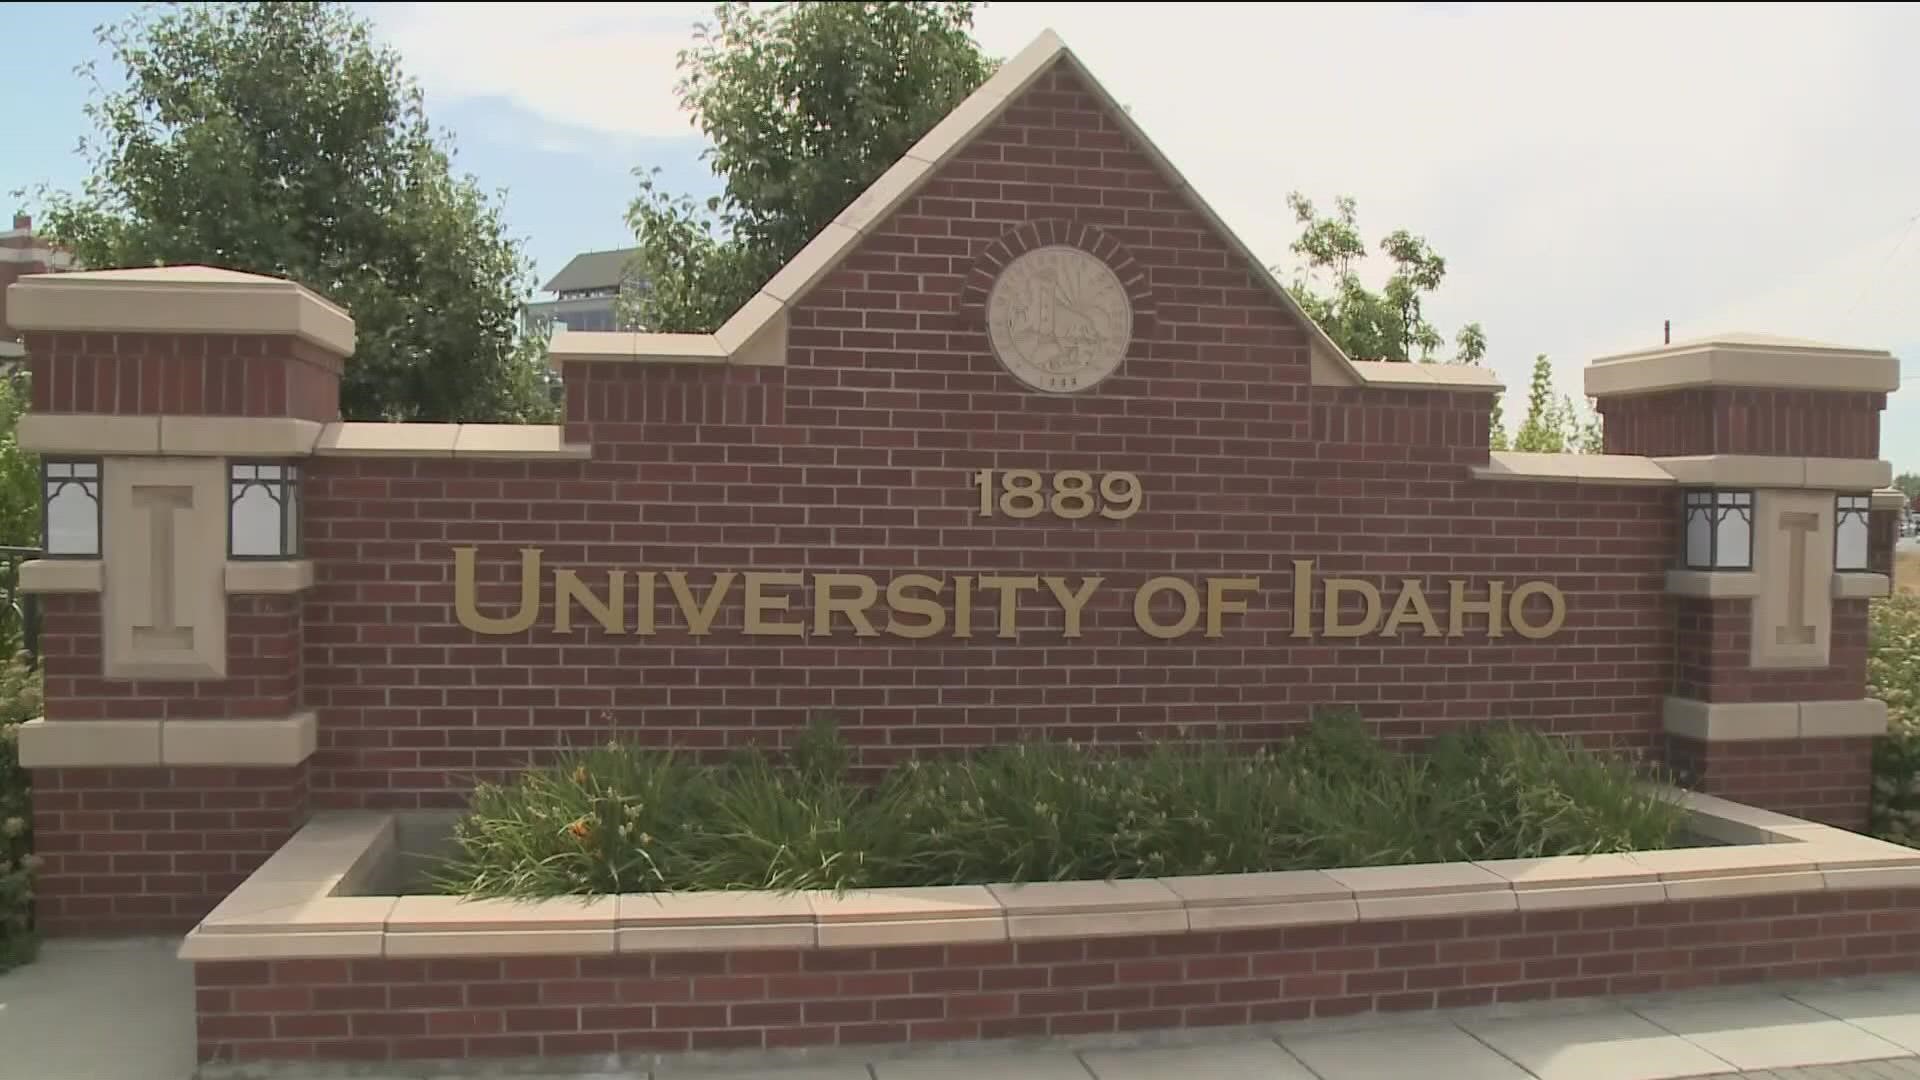 University of Idaho students look to Planned Parenthood in Pullman for birth control services; Atlanta Falcons share Broncos-Aztecs trash talk ahead of Friday's game